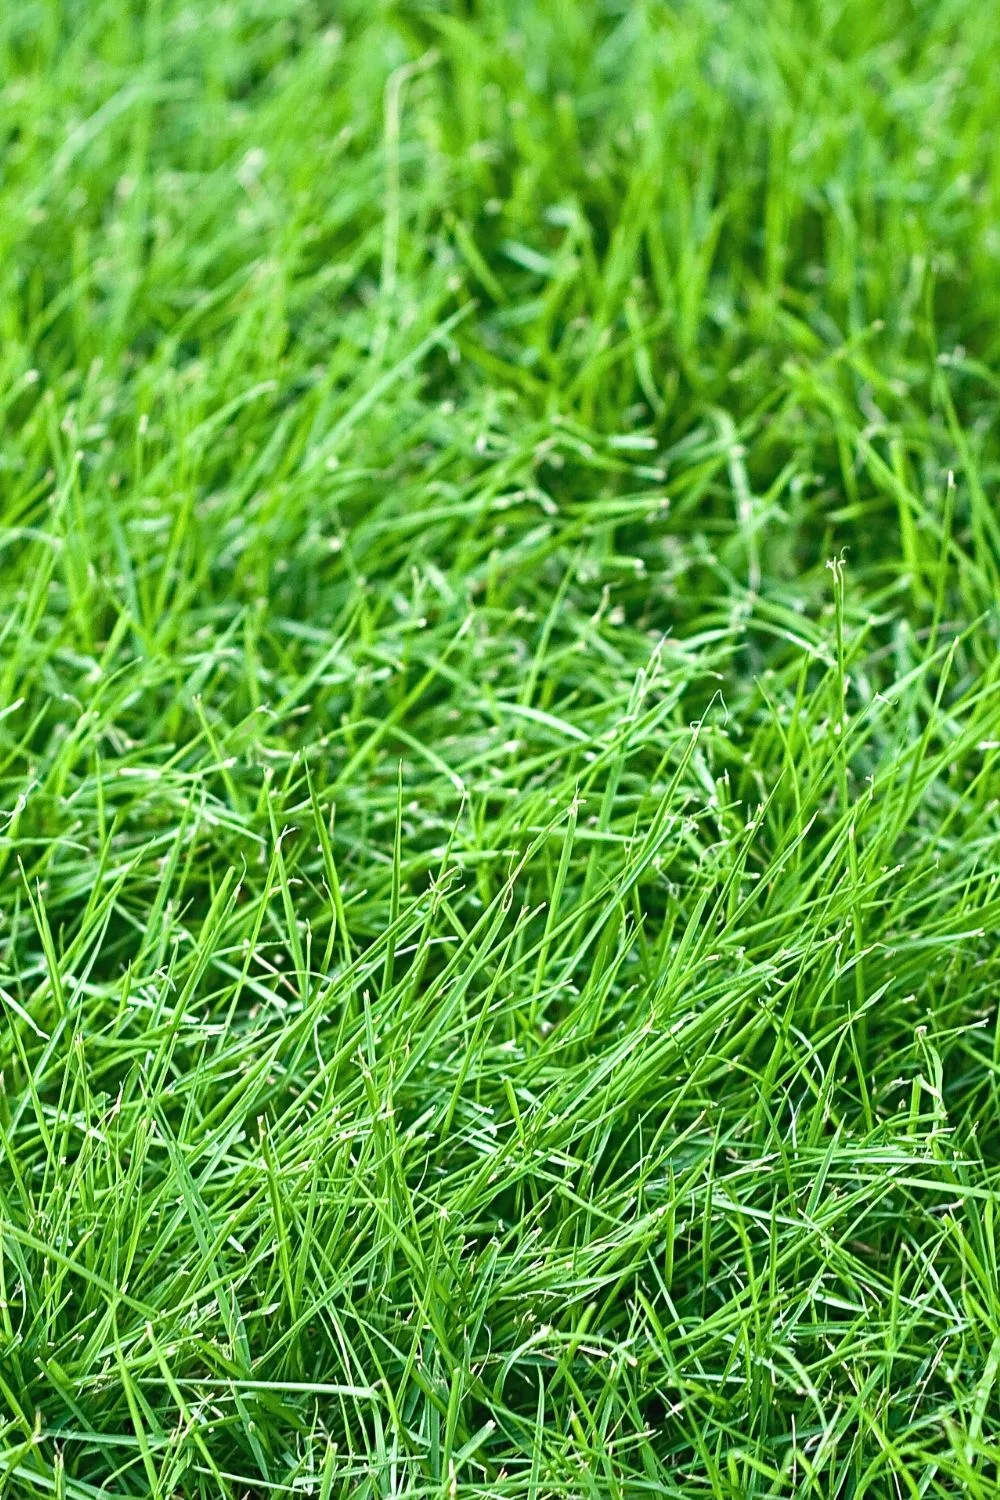 Fine Fescue Lawn Grasses can grow in shaded areas like north-facing balconies if you use soil composed with organic matter